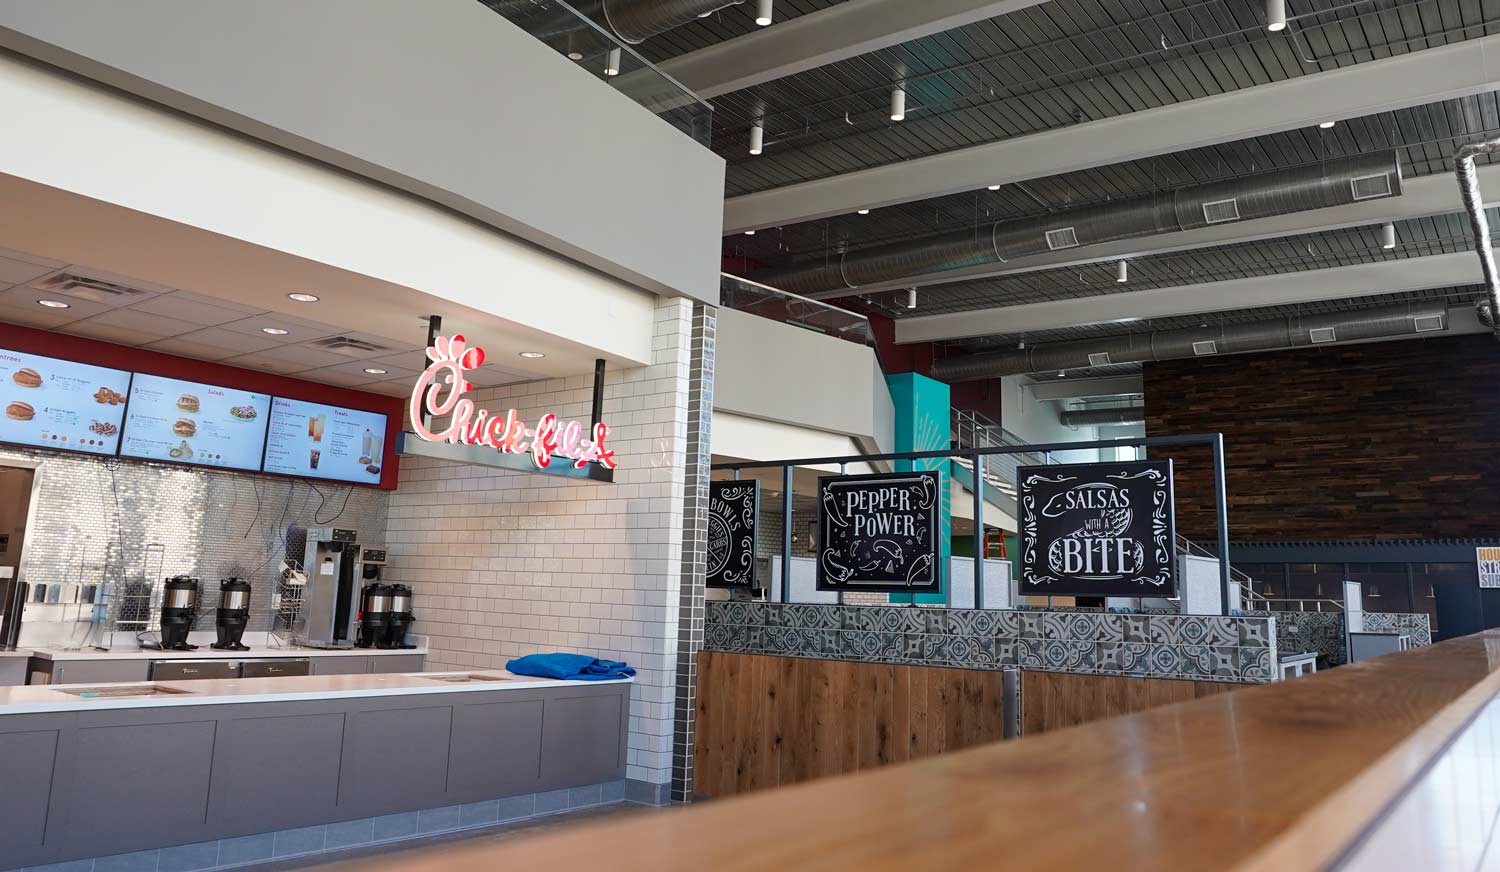 the West Campus dining hall Chick Fil A